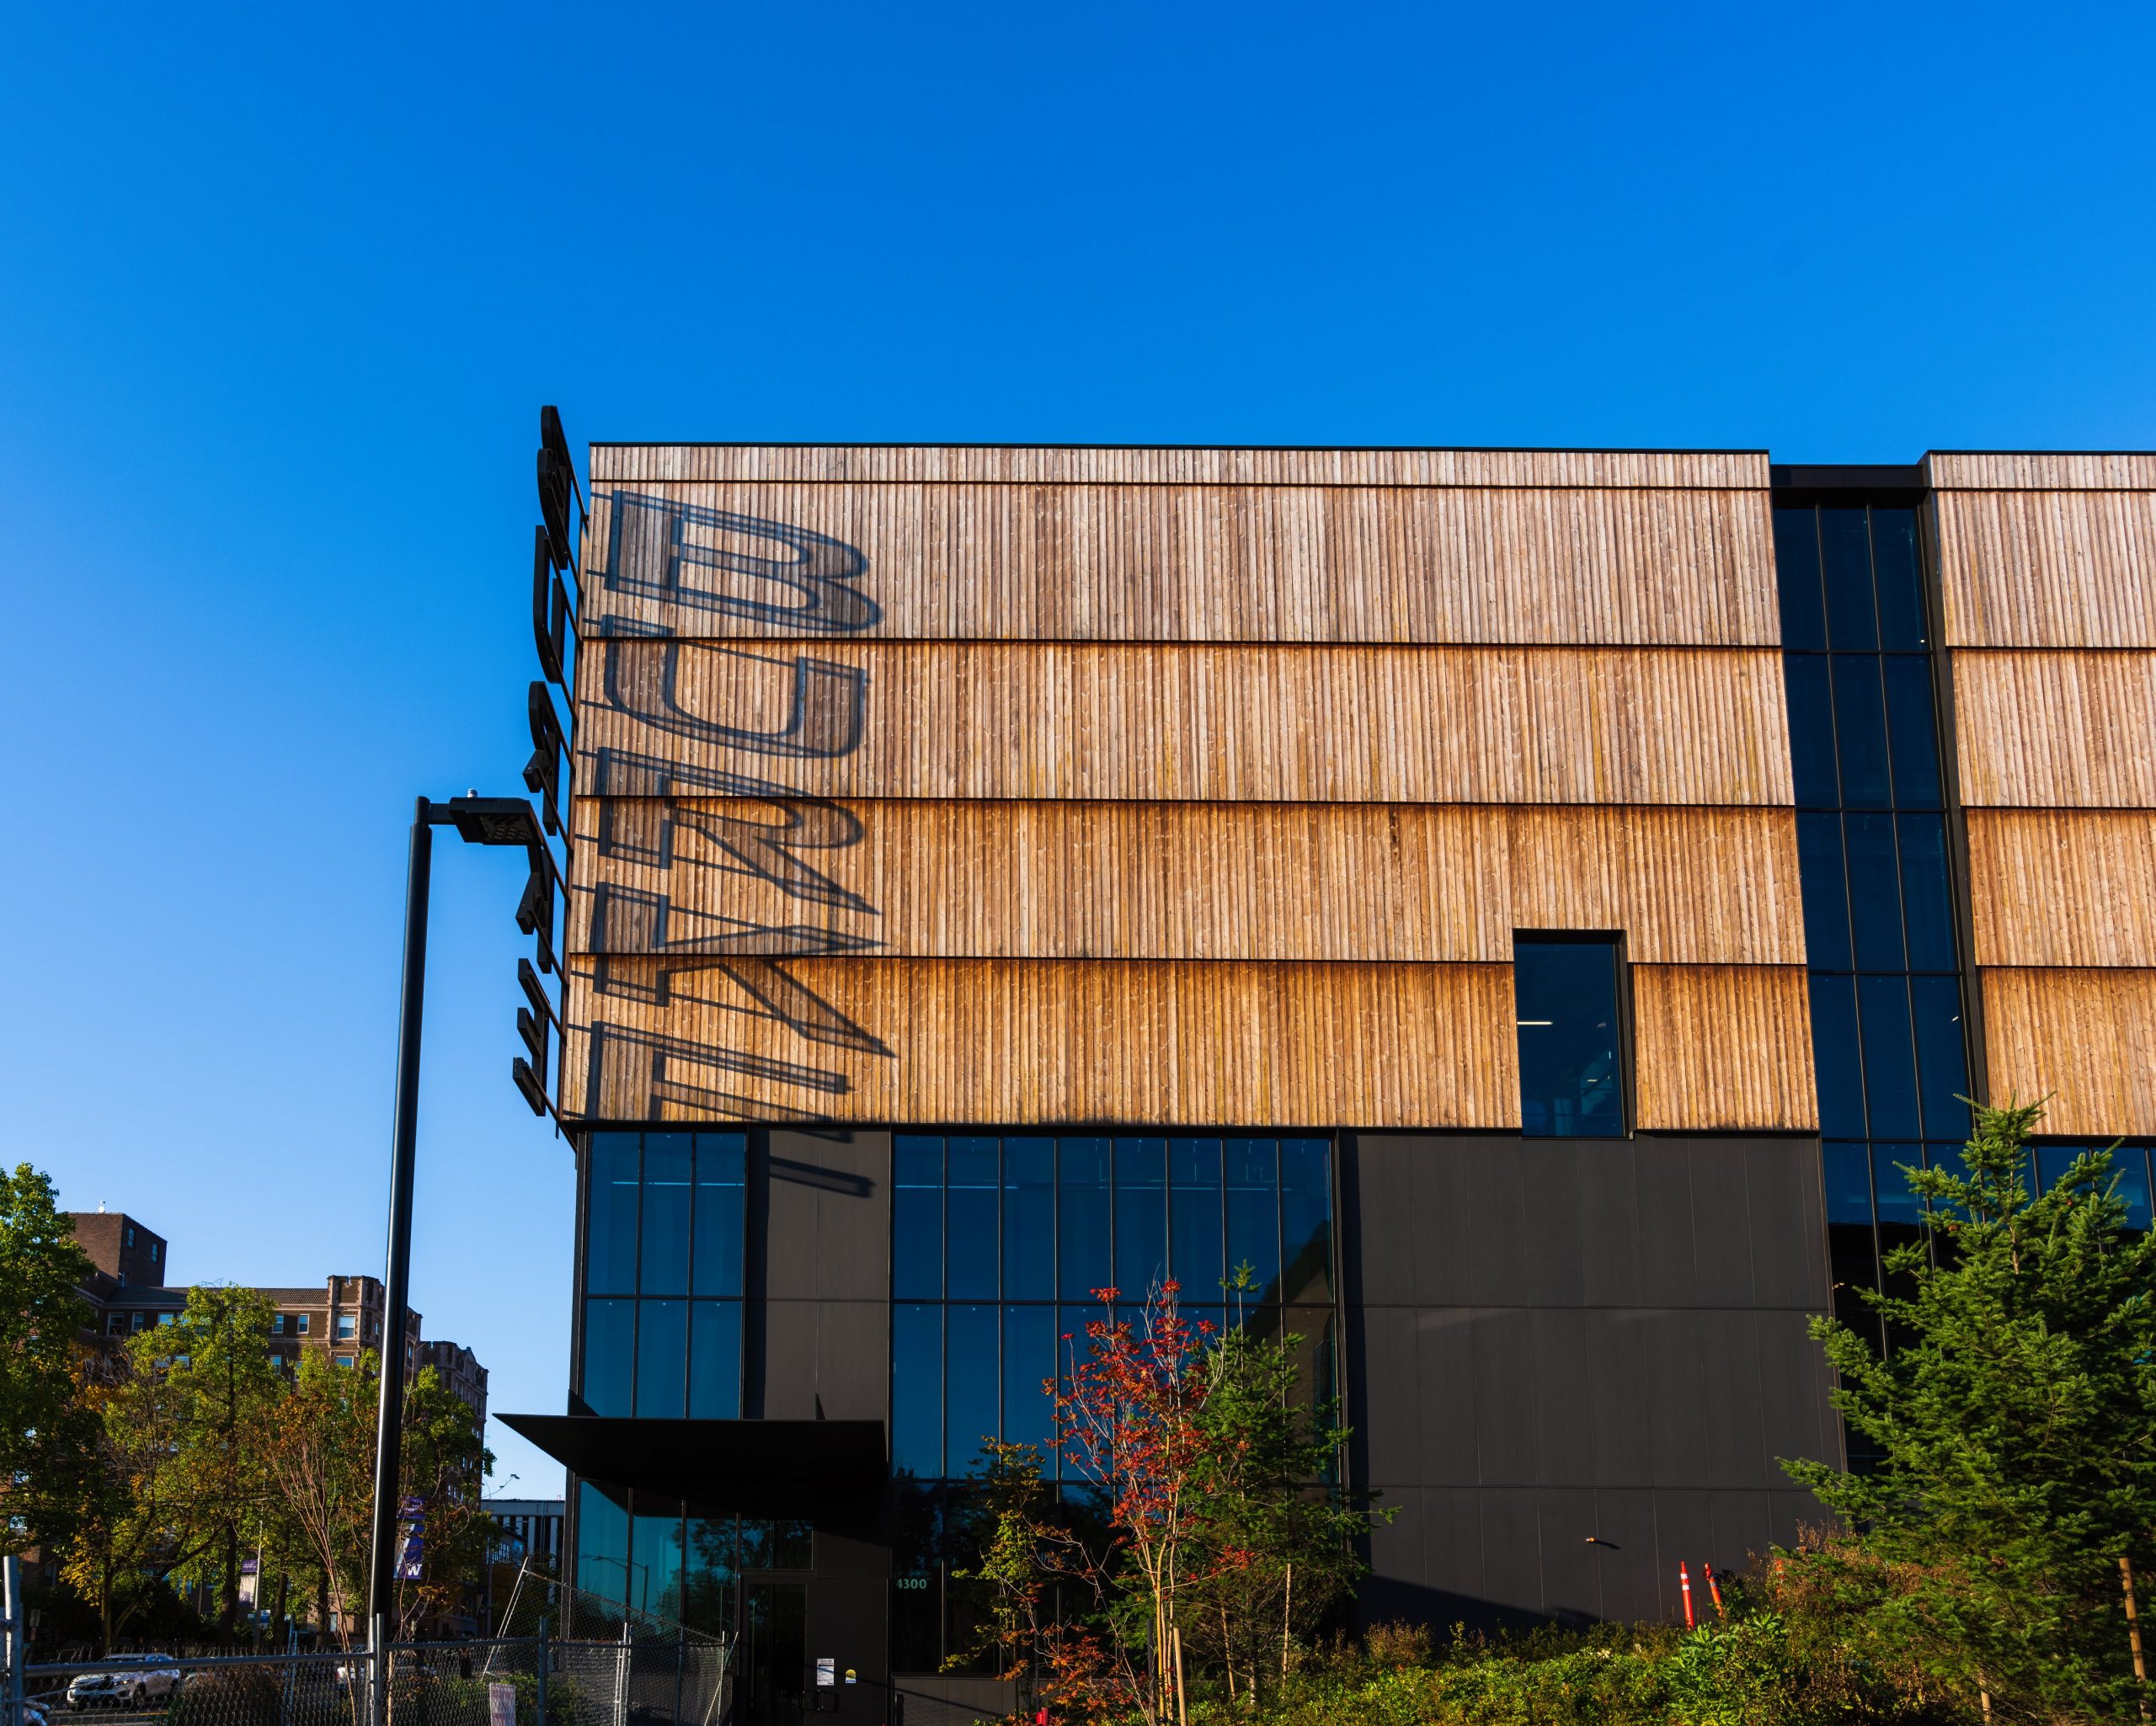 Edge of the Burke Museum of Natural History's exterior walls featuring Kebony Modified Wood Character Cladding in Seattle, Washington during a sunset and bright blue sky